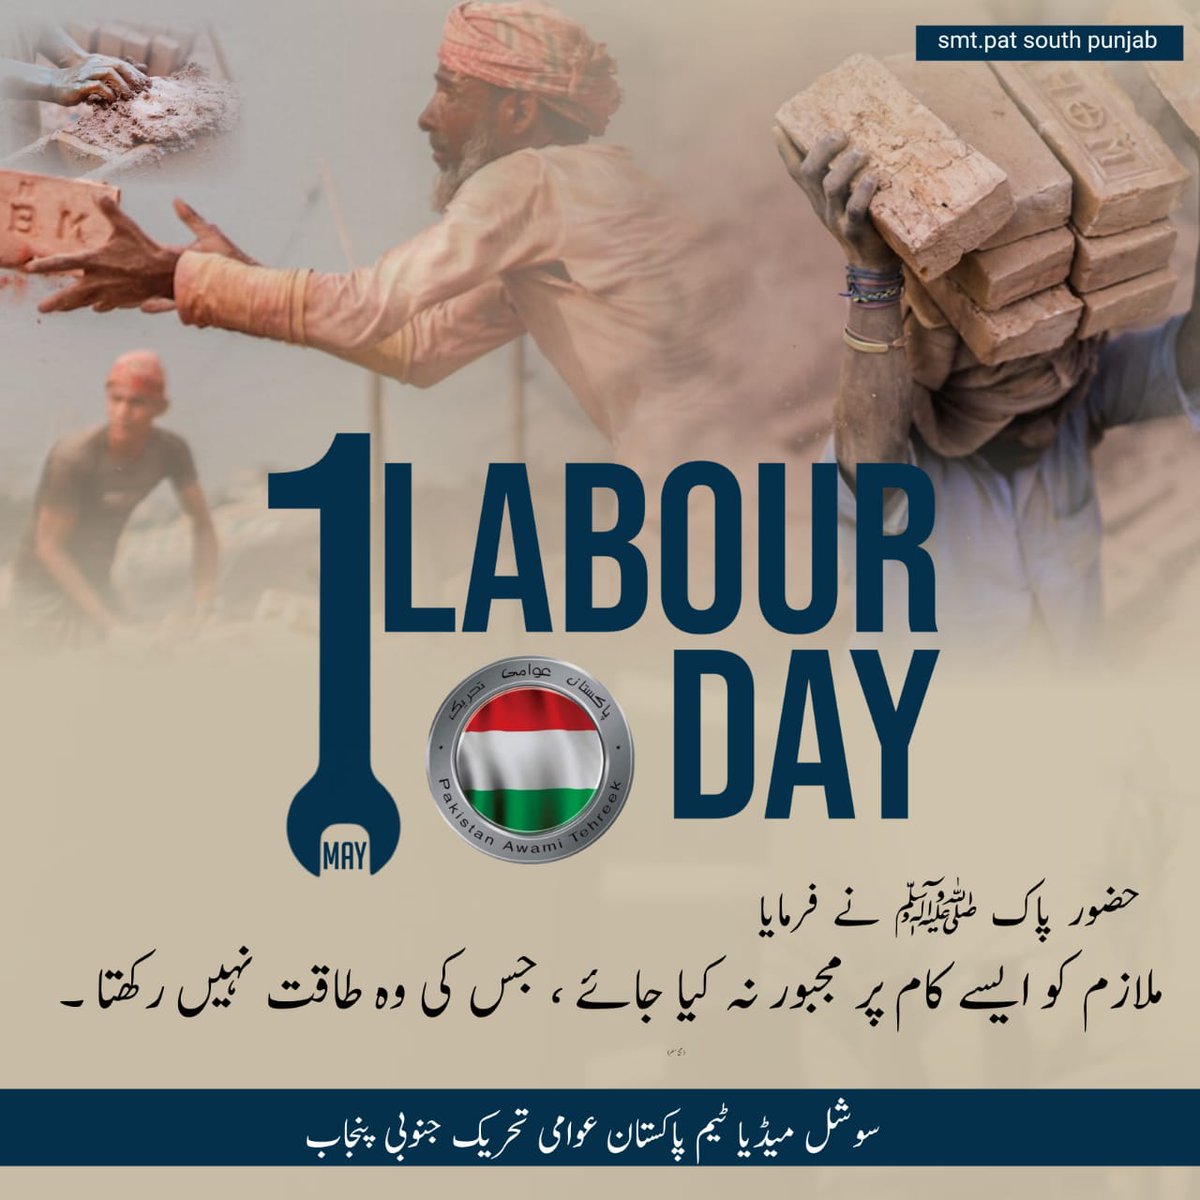 Happy #LabourDay to all those who wake up early, work hard, and never give up.
#laboursday 
#یوم_مزدور